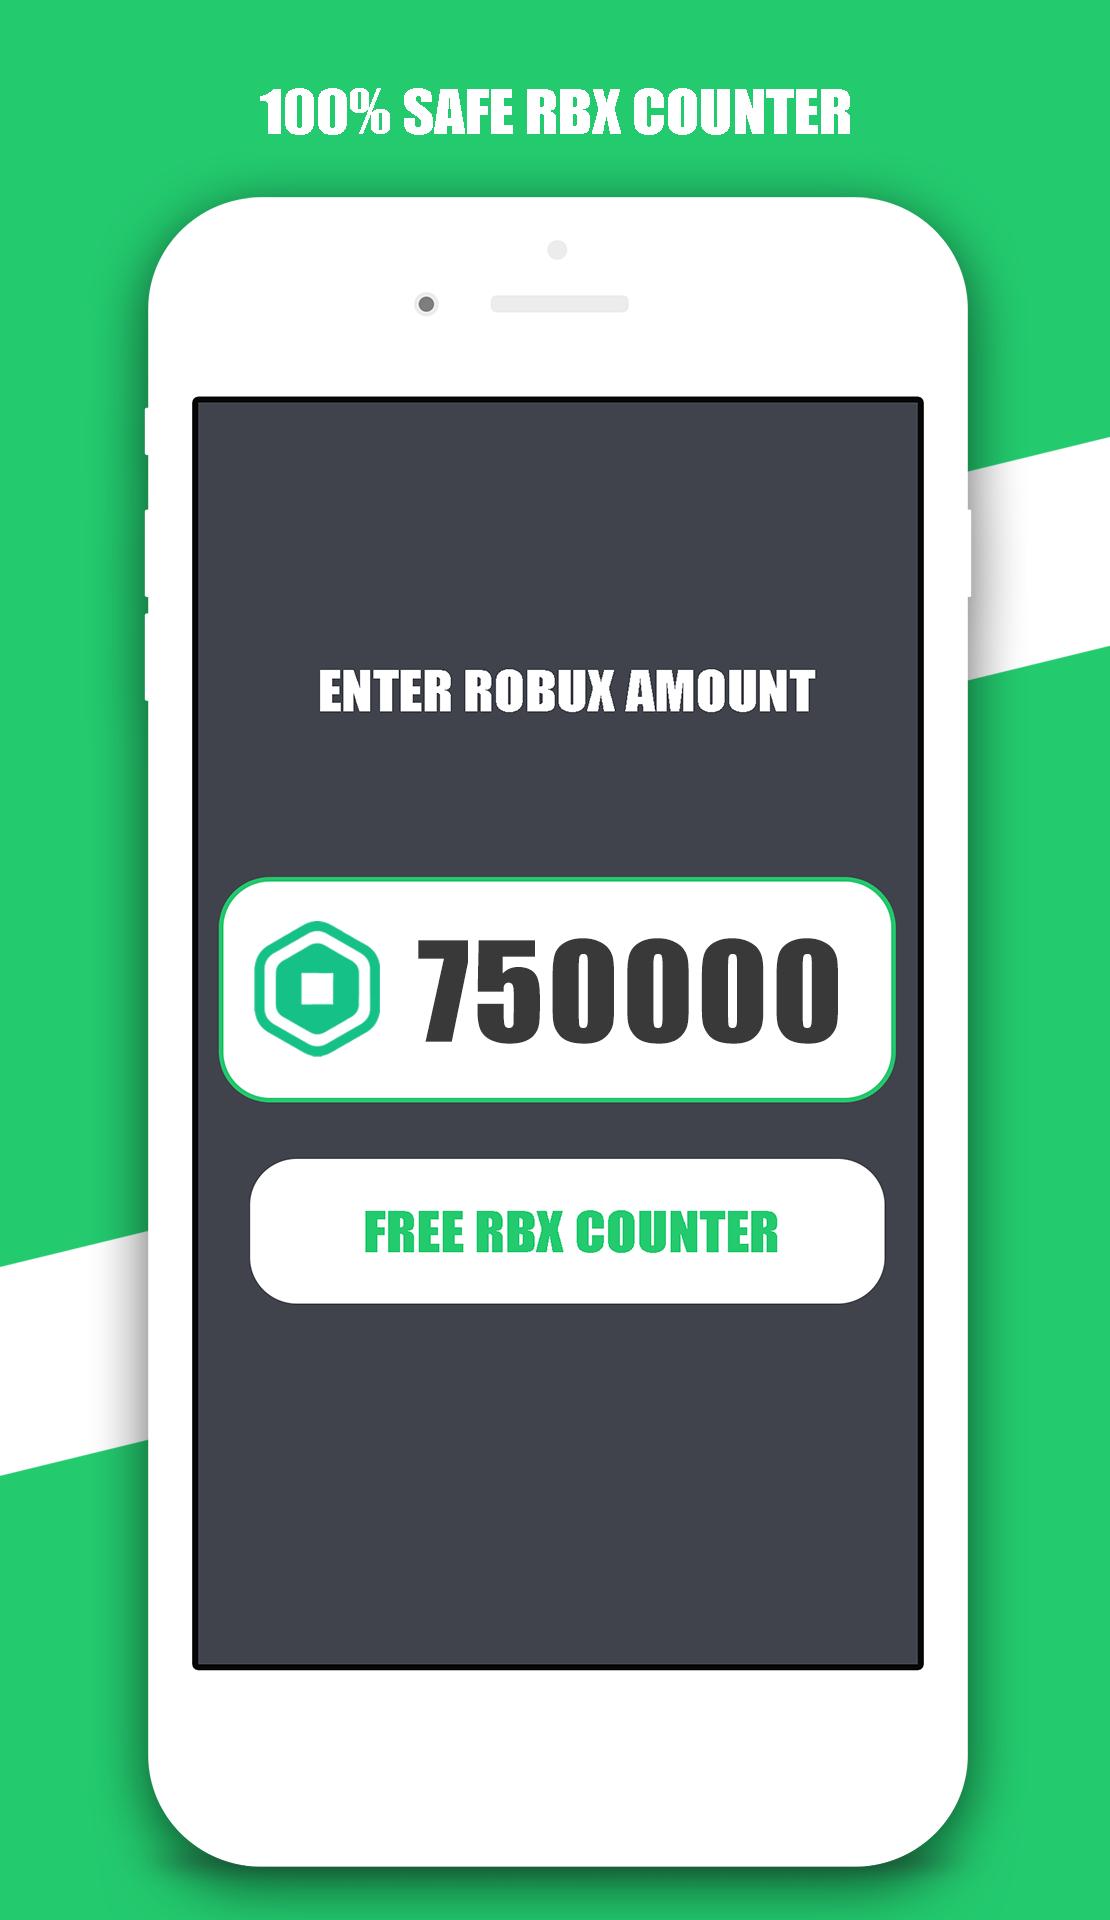 Free Robux Counter For Android Apk Download - download free robux counter for roblox 2019 apk latest